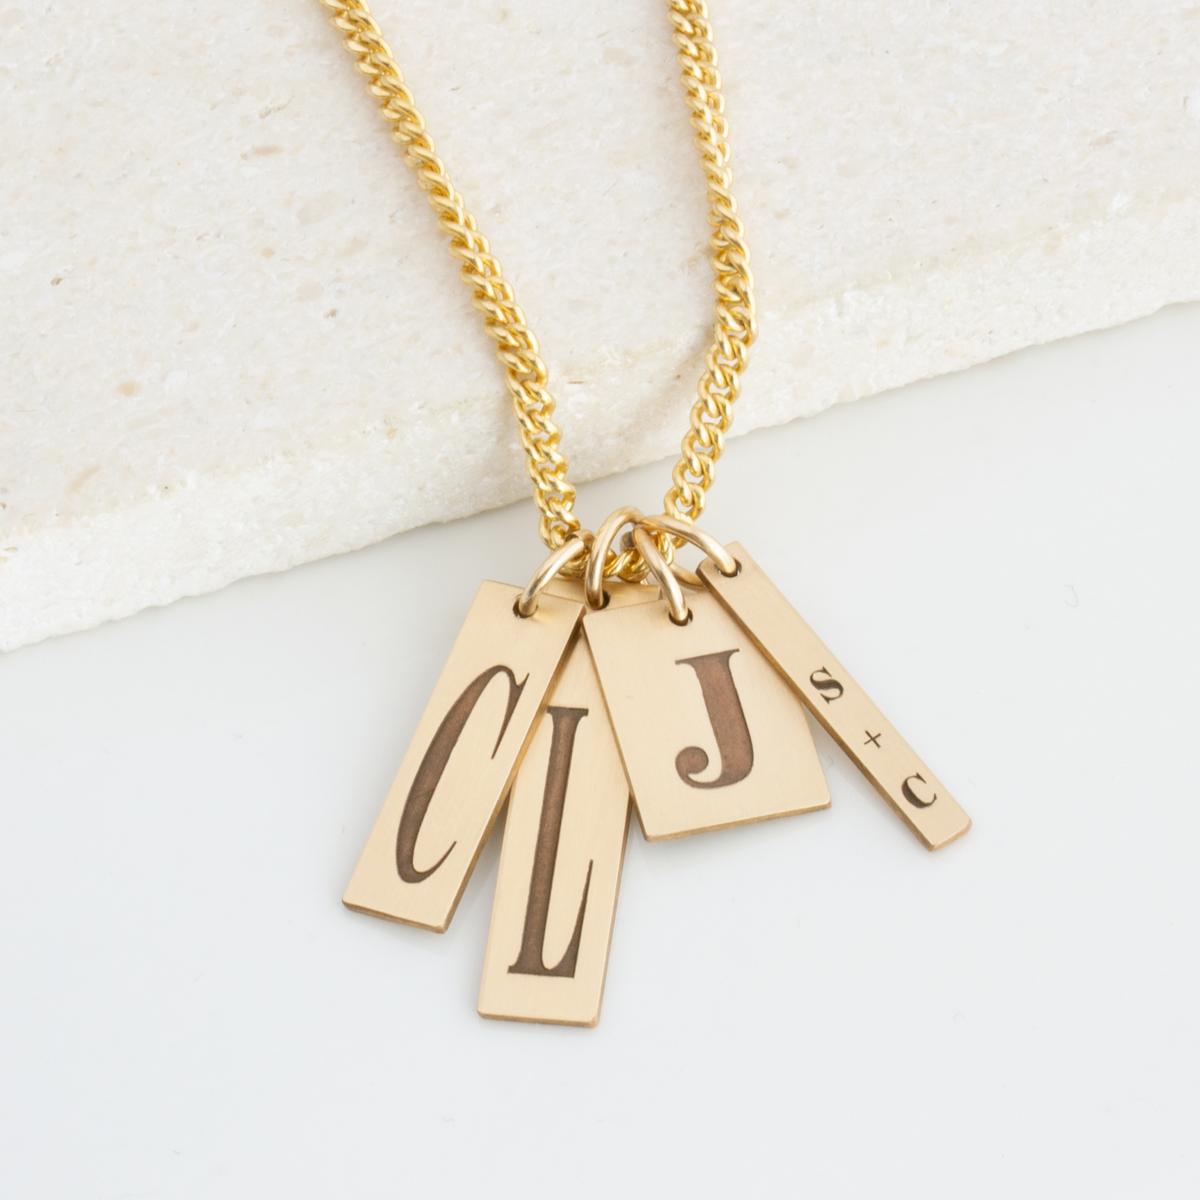 Family Tags Necklace